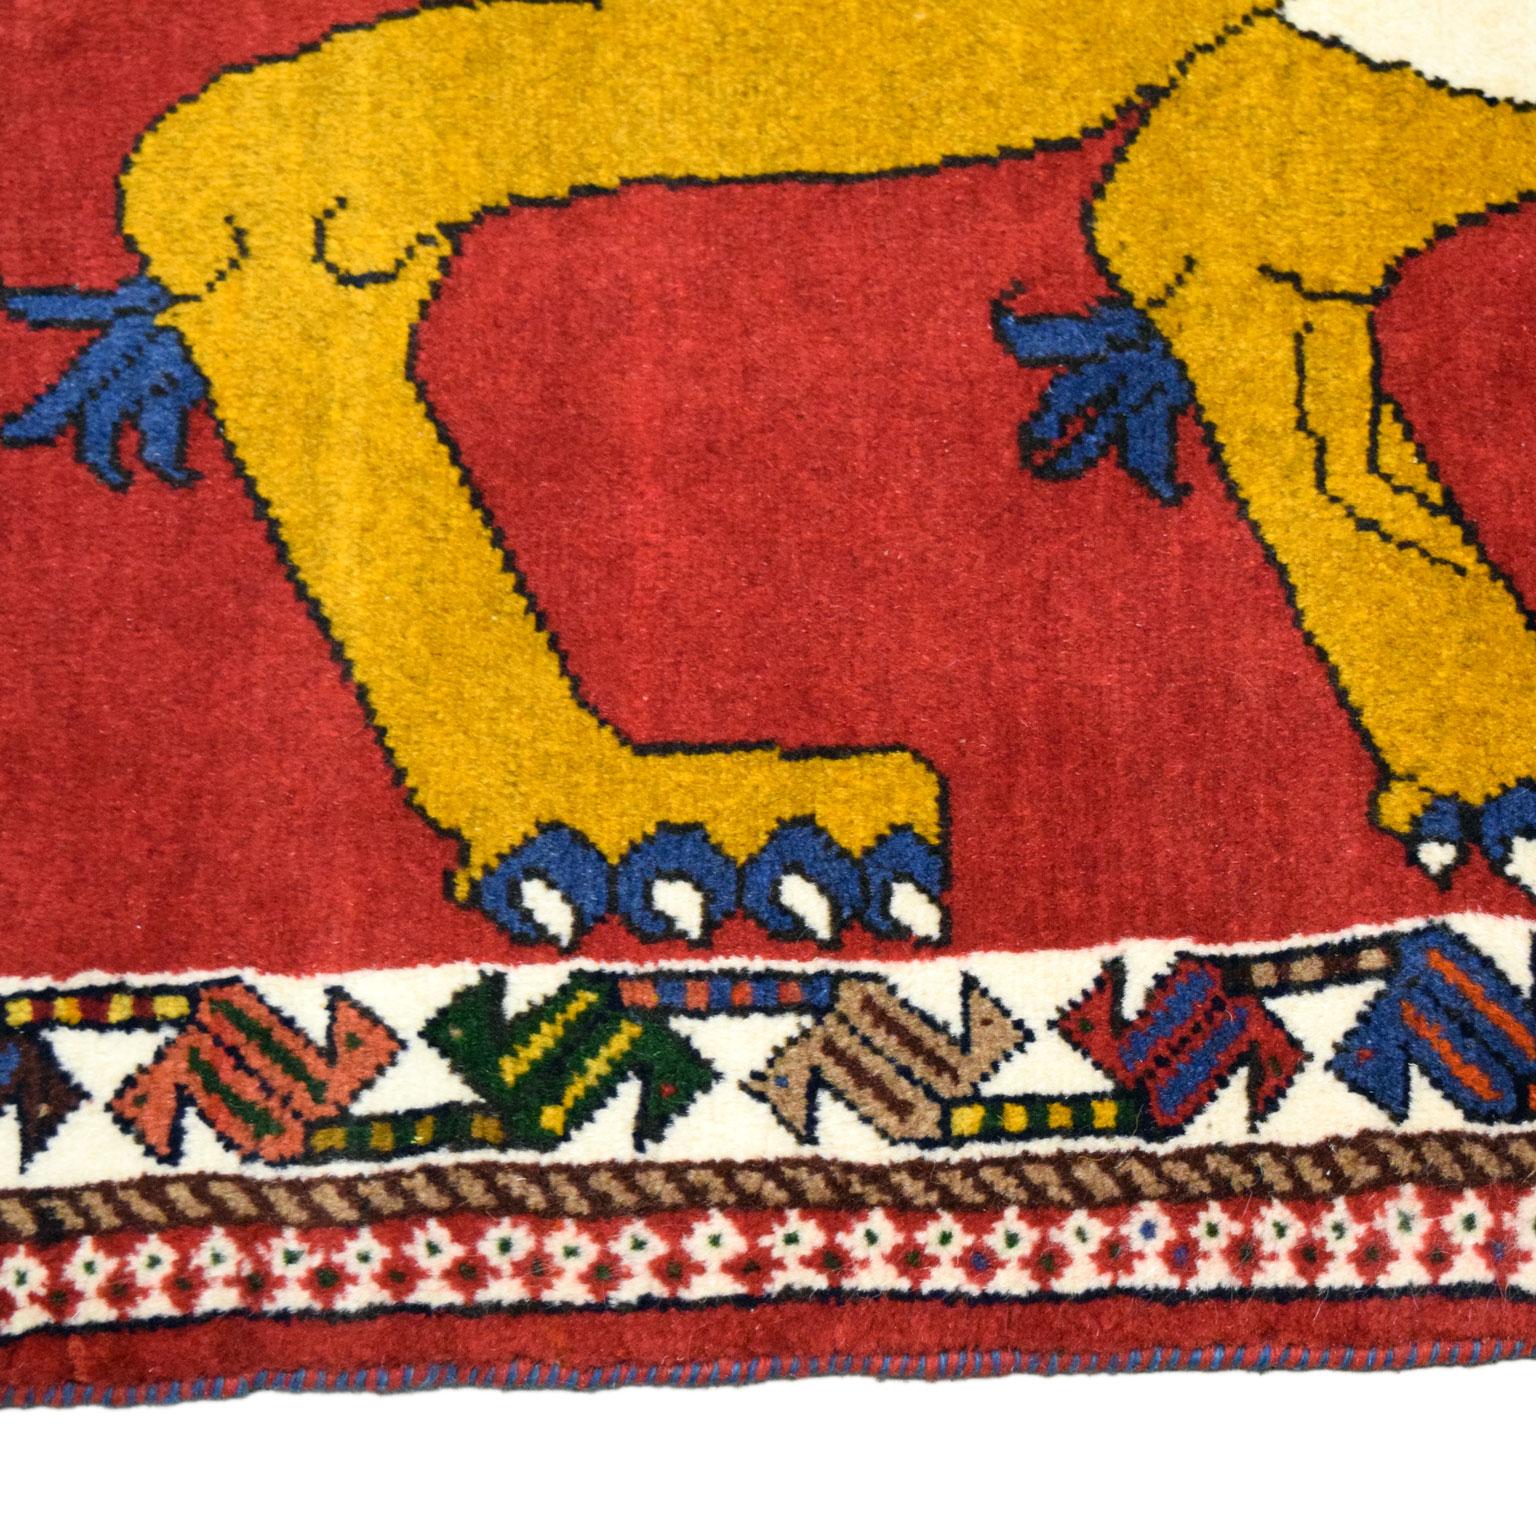 Late 20th Century Distinctive Majestic Persian Lion with Sword Rug in Gold, Red, and Blue